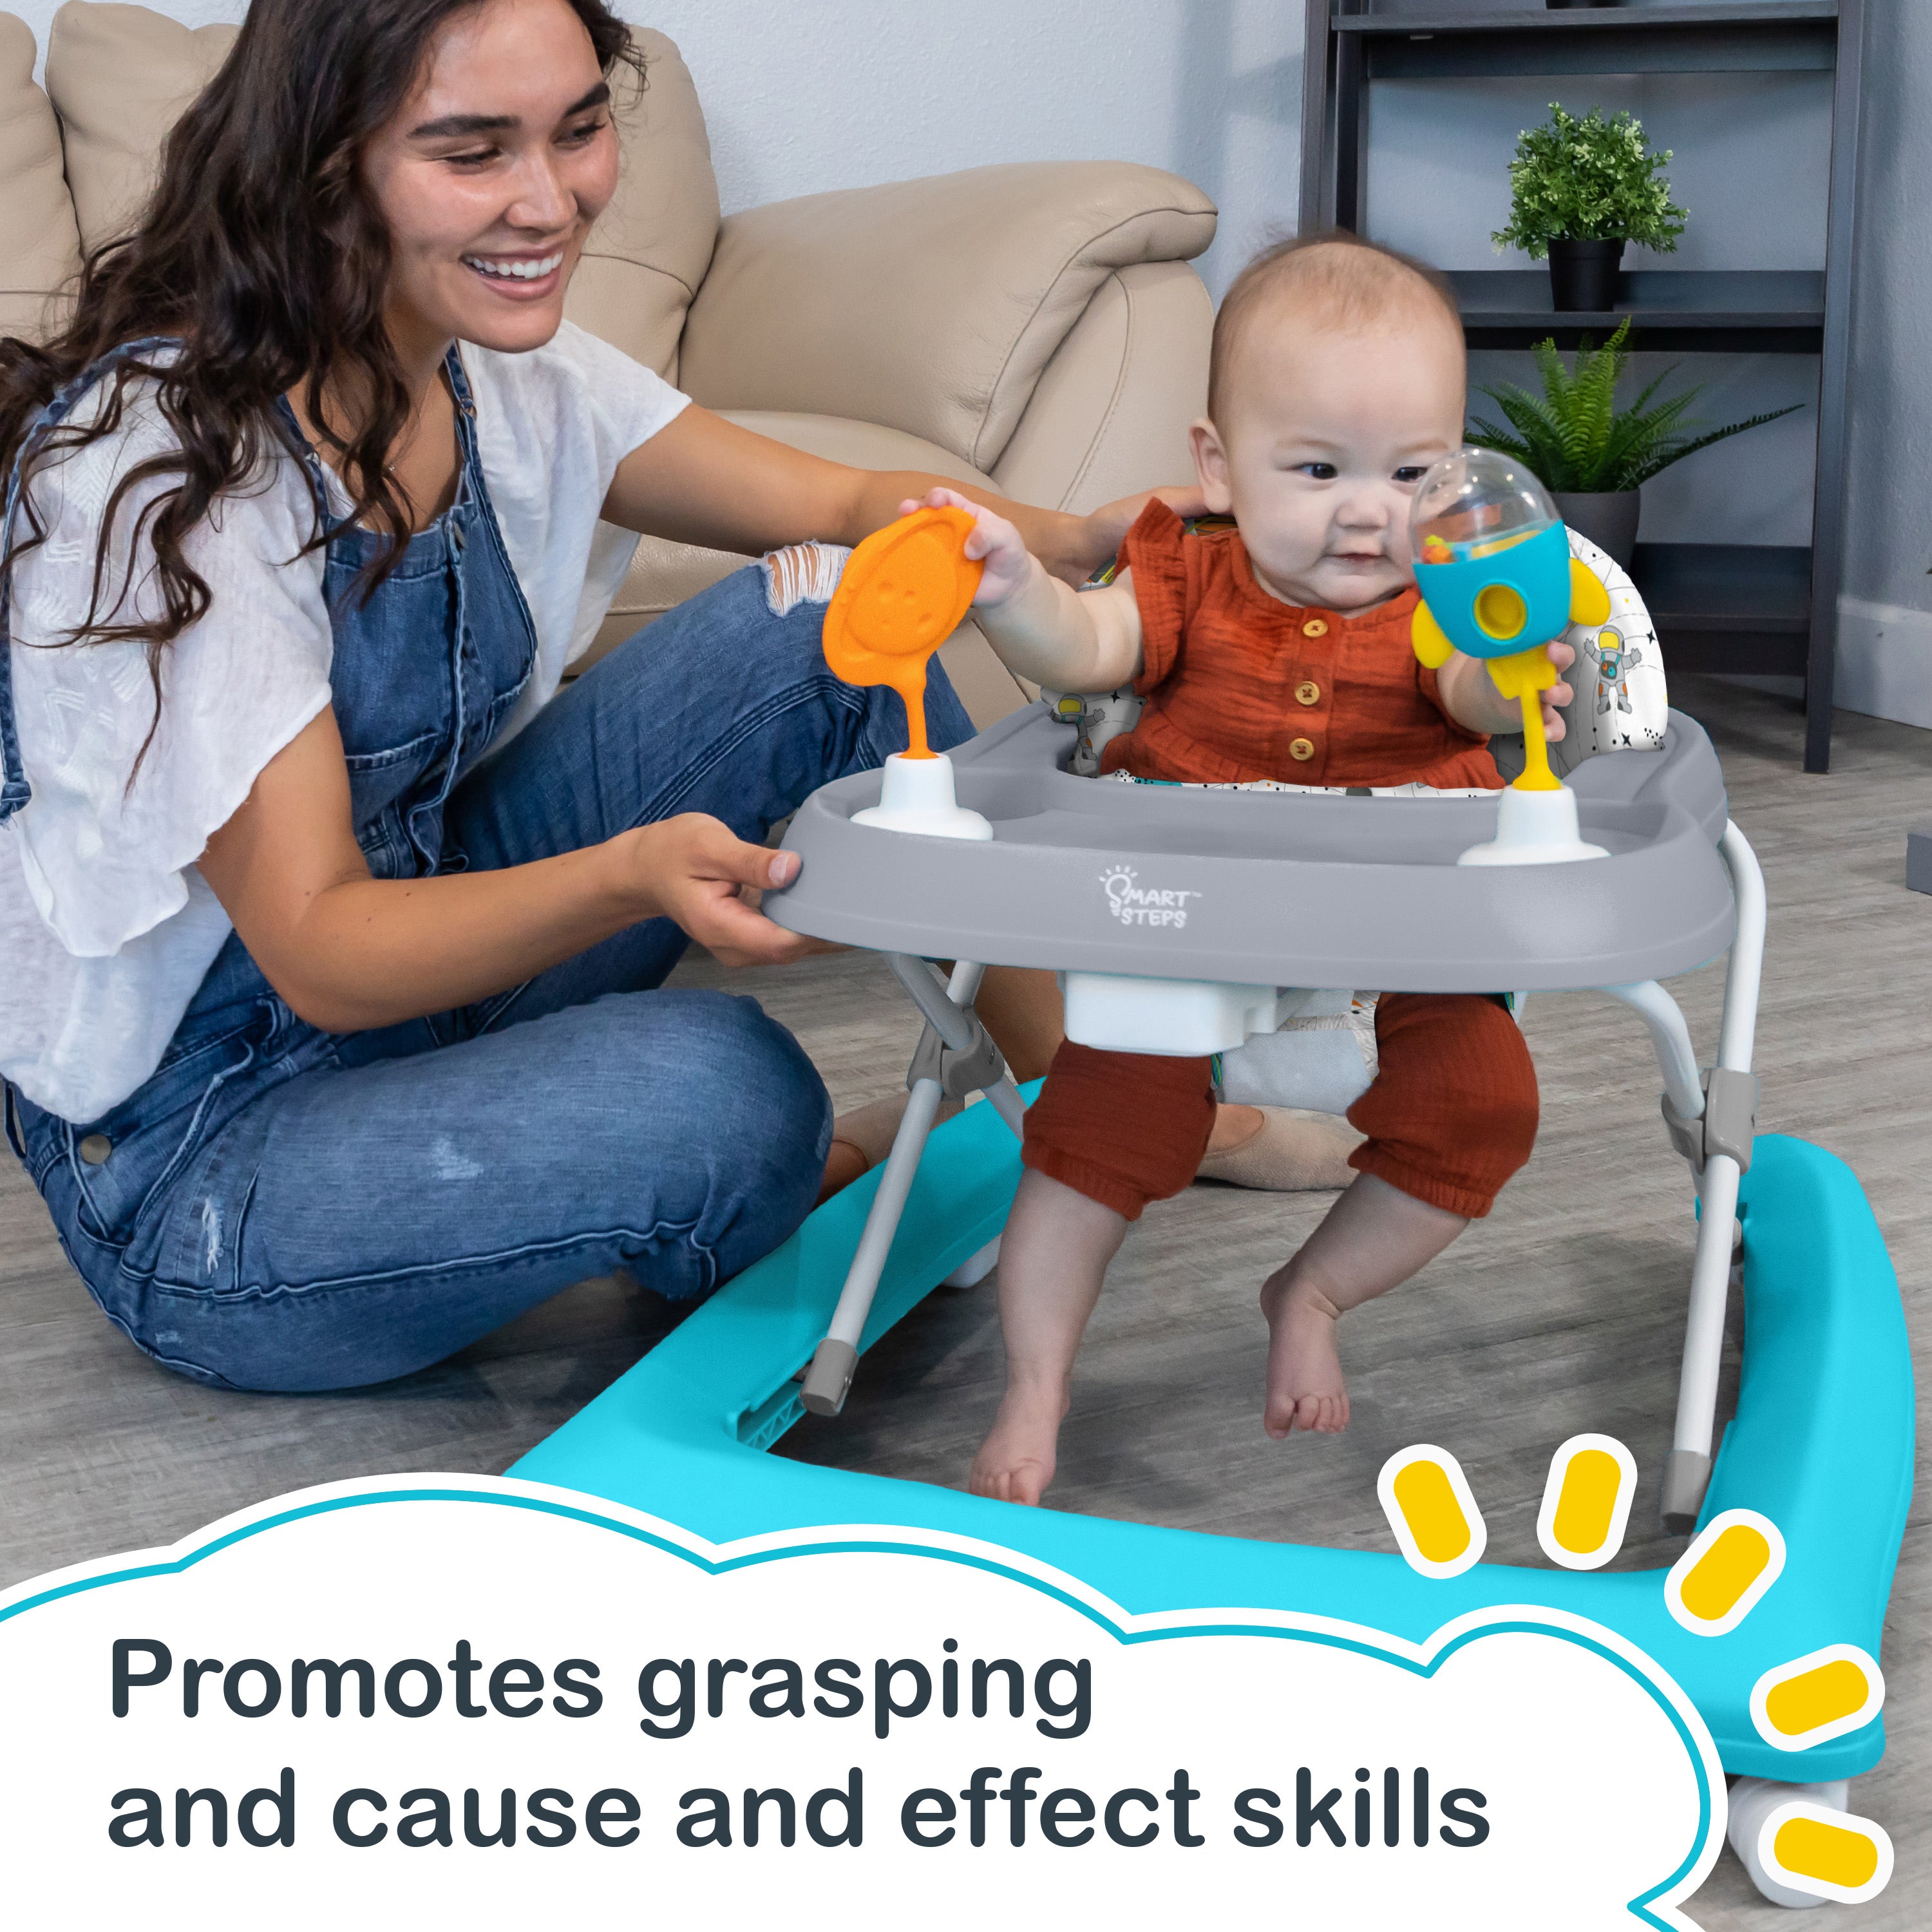 Metal Portable Baby Walker With Wheels And Seat Walker For Kids